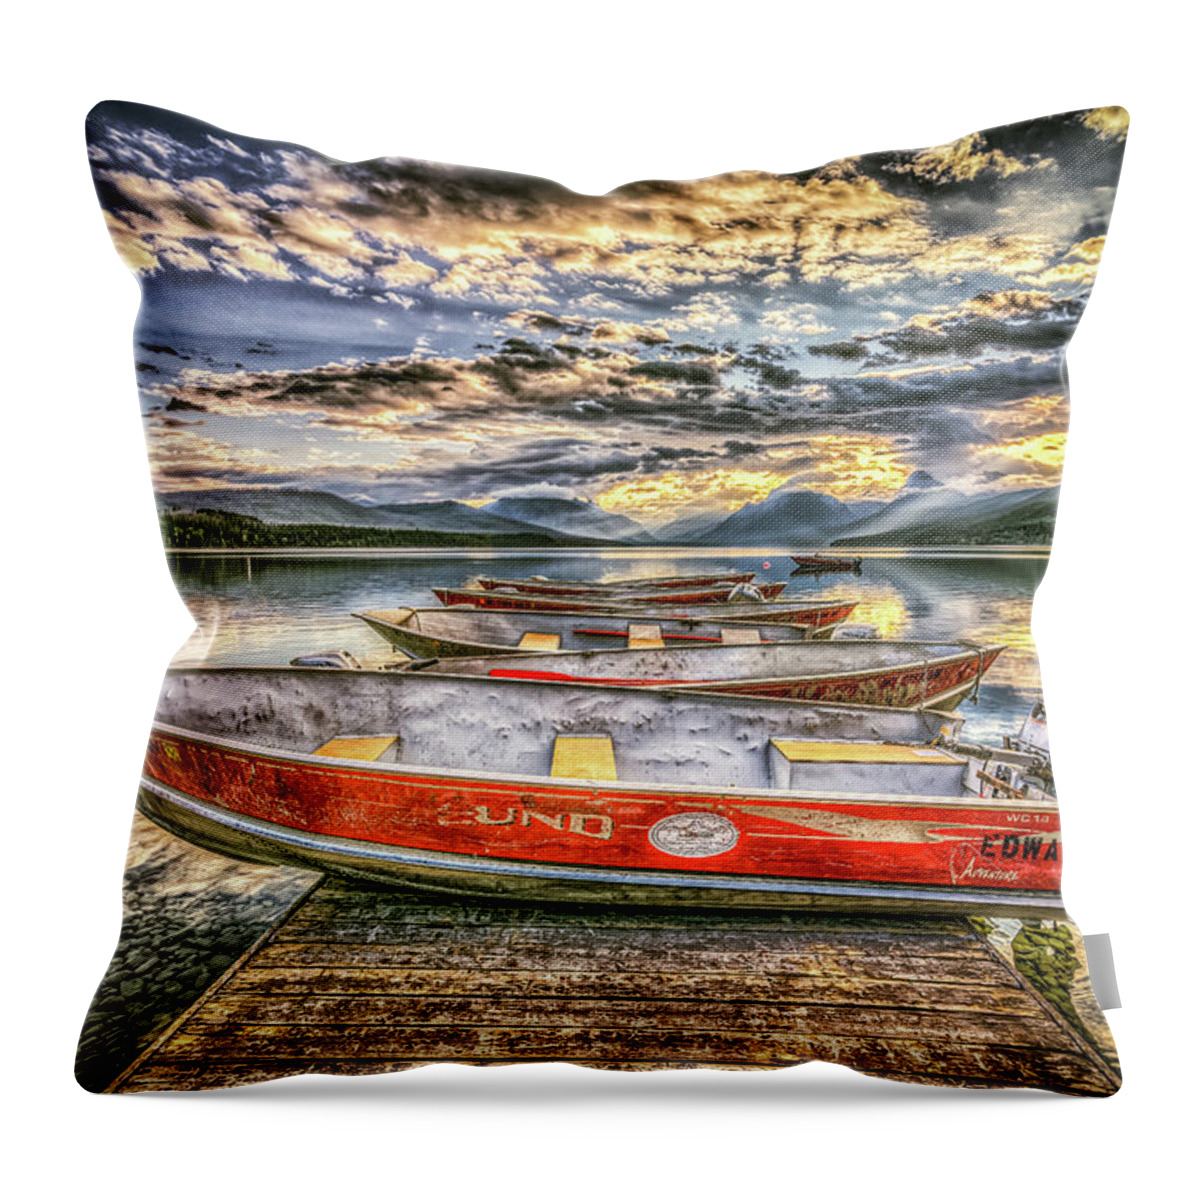 Boats Throw Pillow featuring the photograph Big Sky Boats by Spencer McDonald